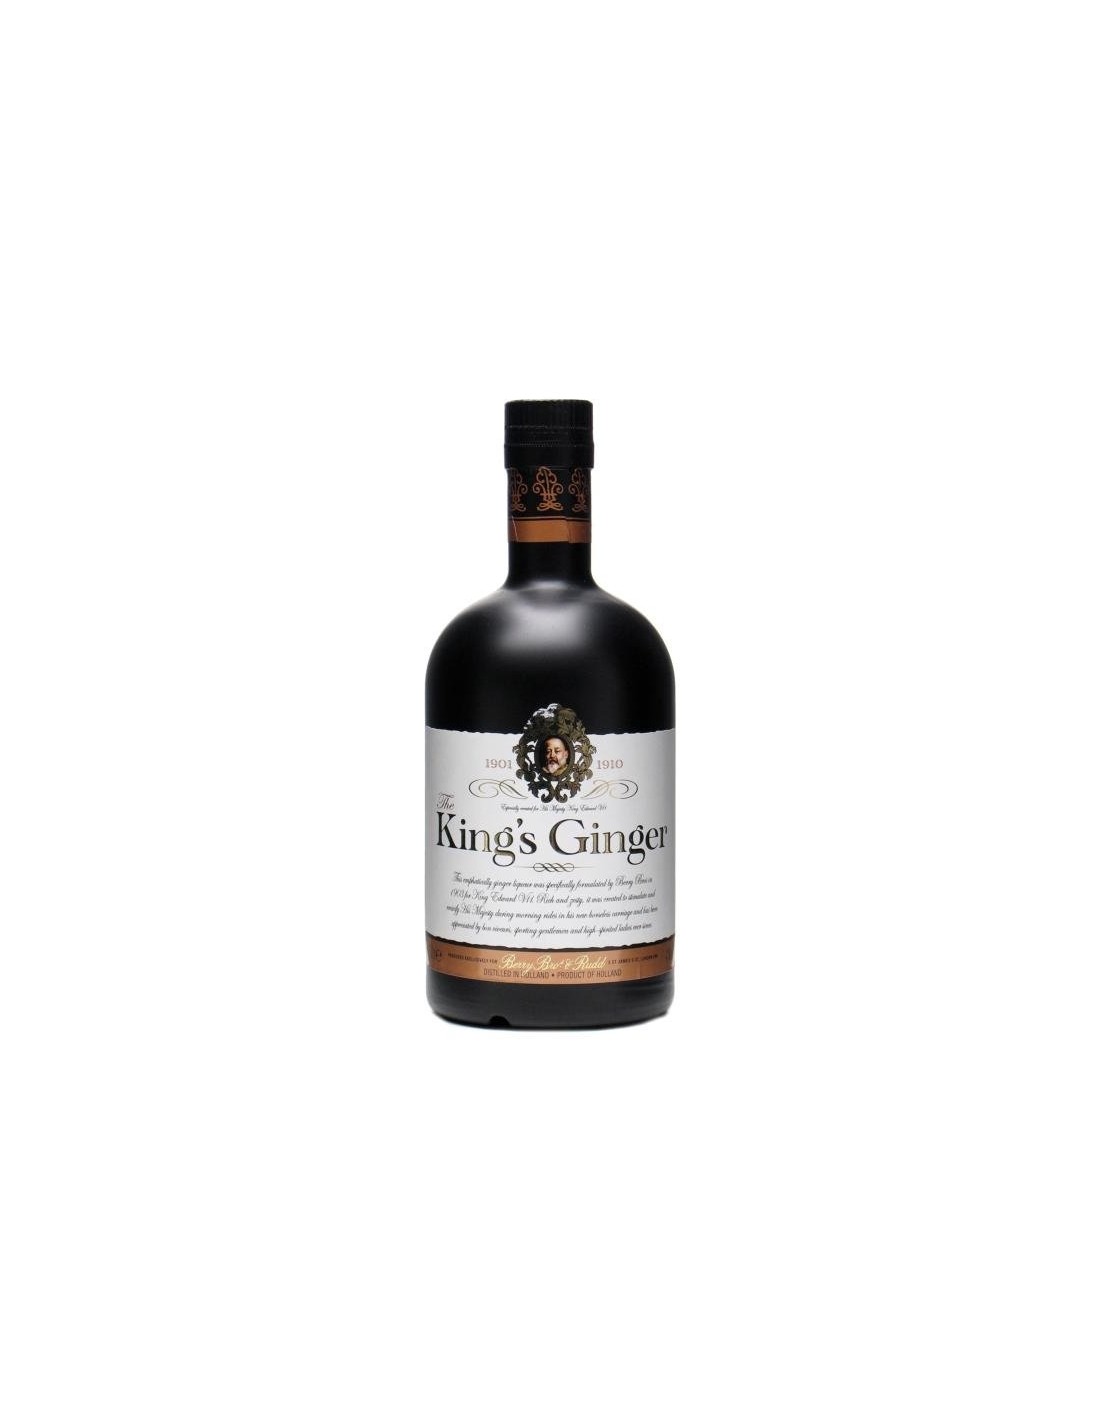 Lichior King’s Ginger, 41% alc., 0.5L alcooldiscount.ro